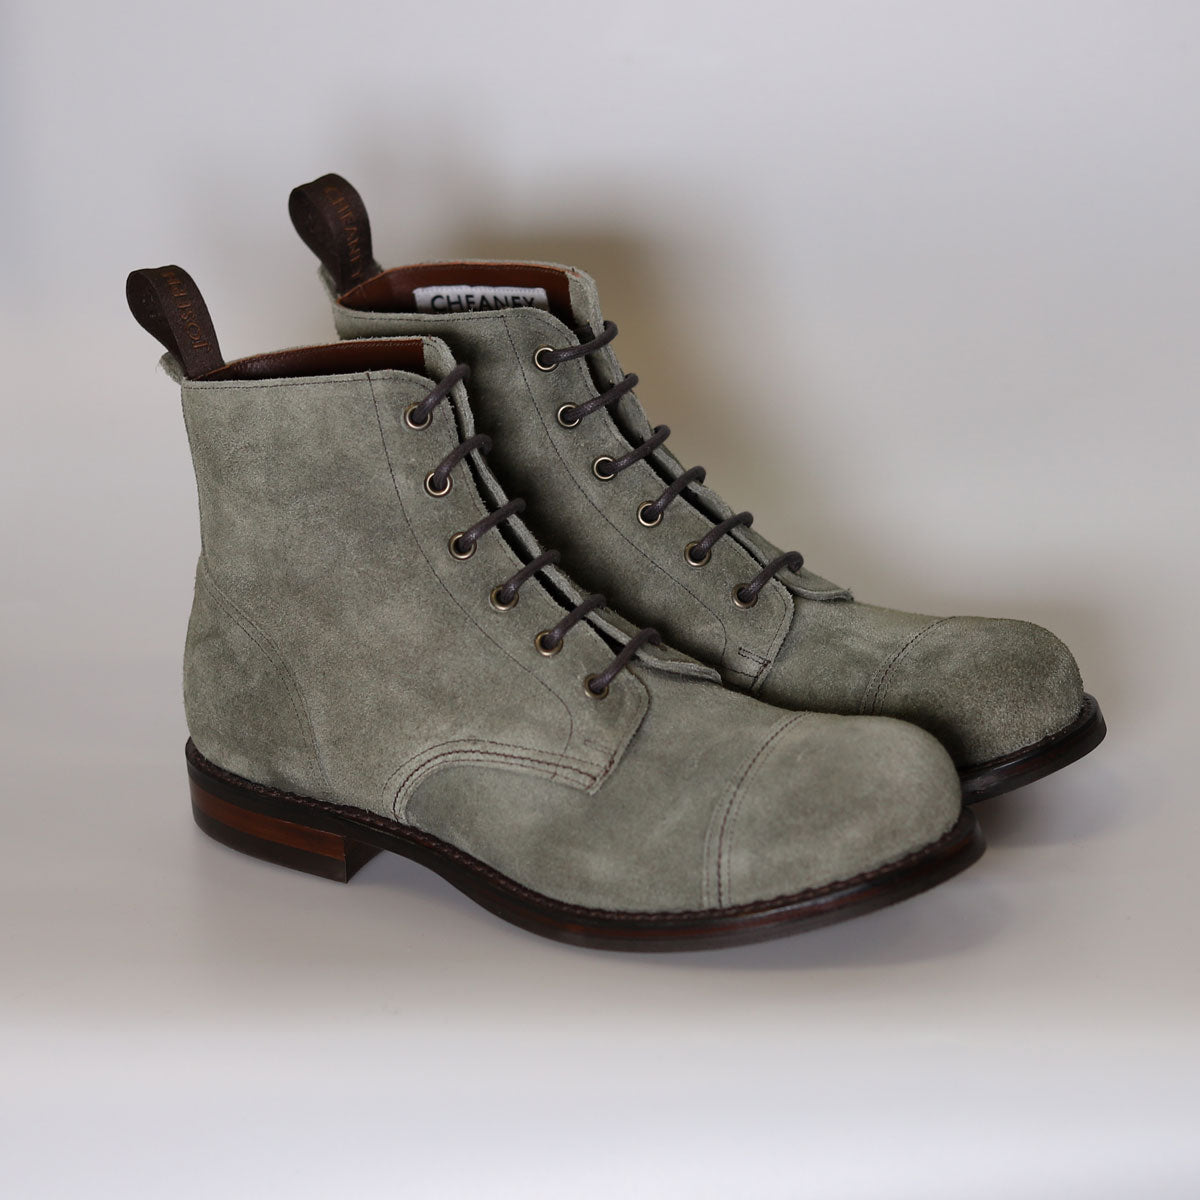 Rathmullan R Military Style Ankle Boot in Green Palio Suede